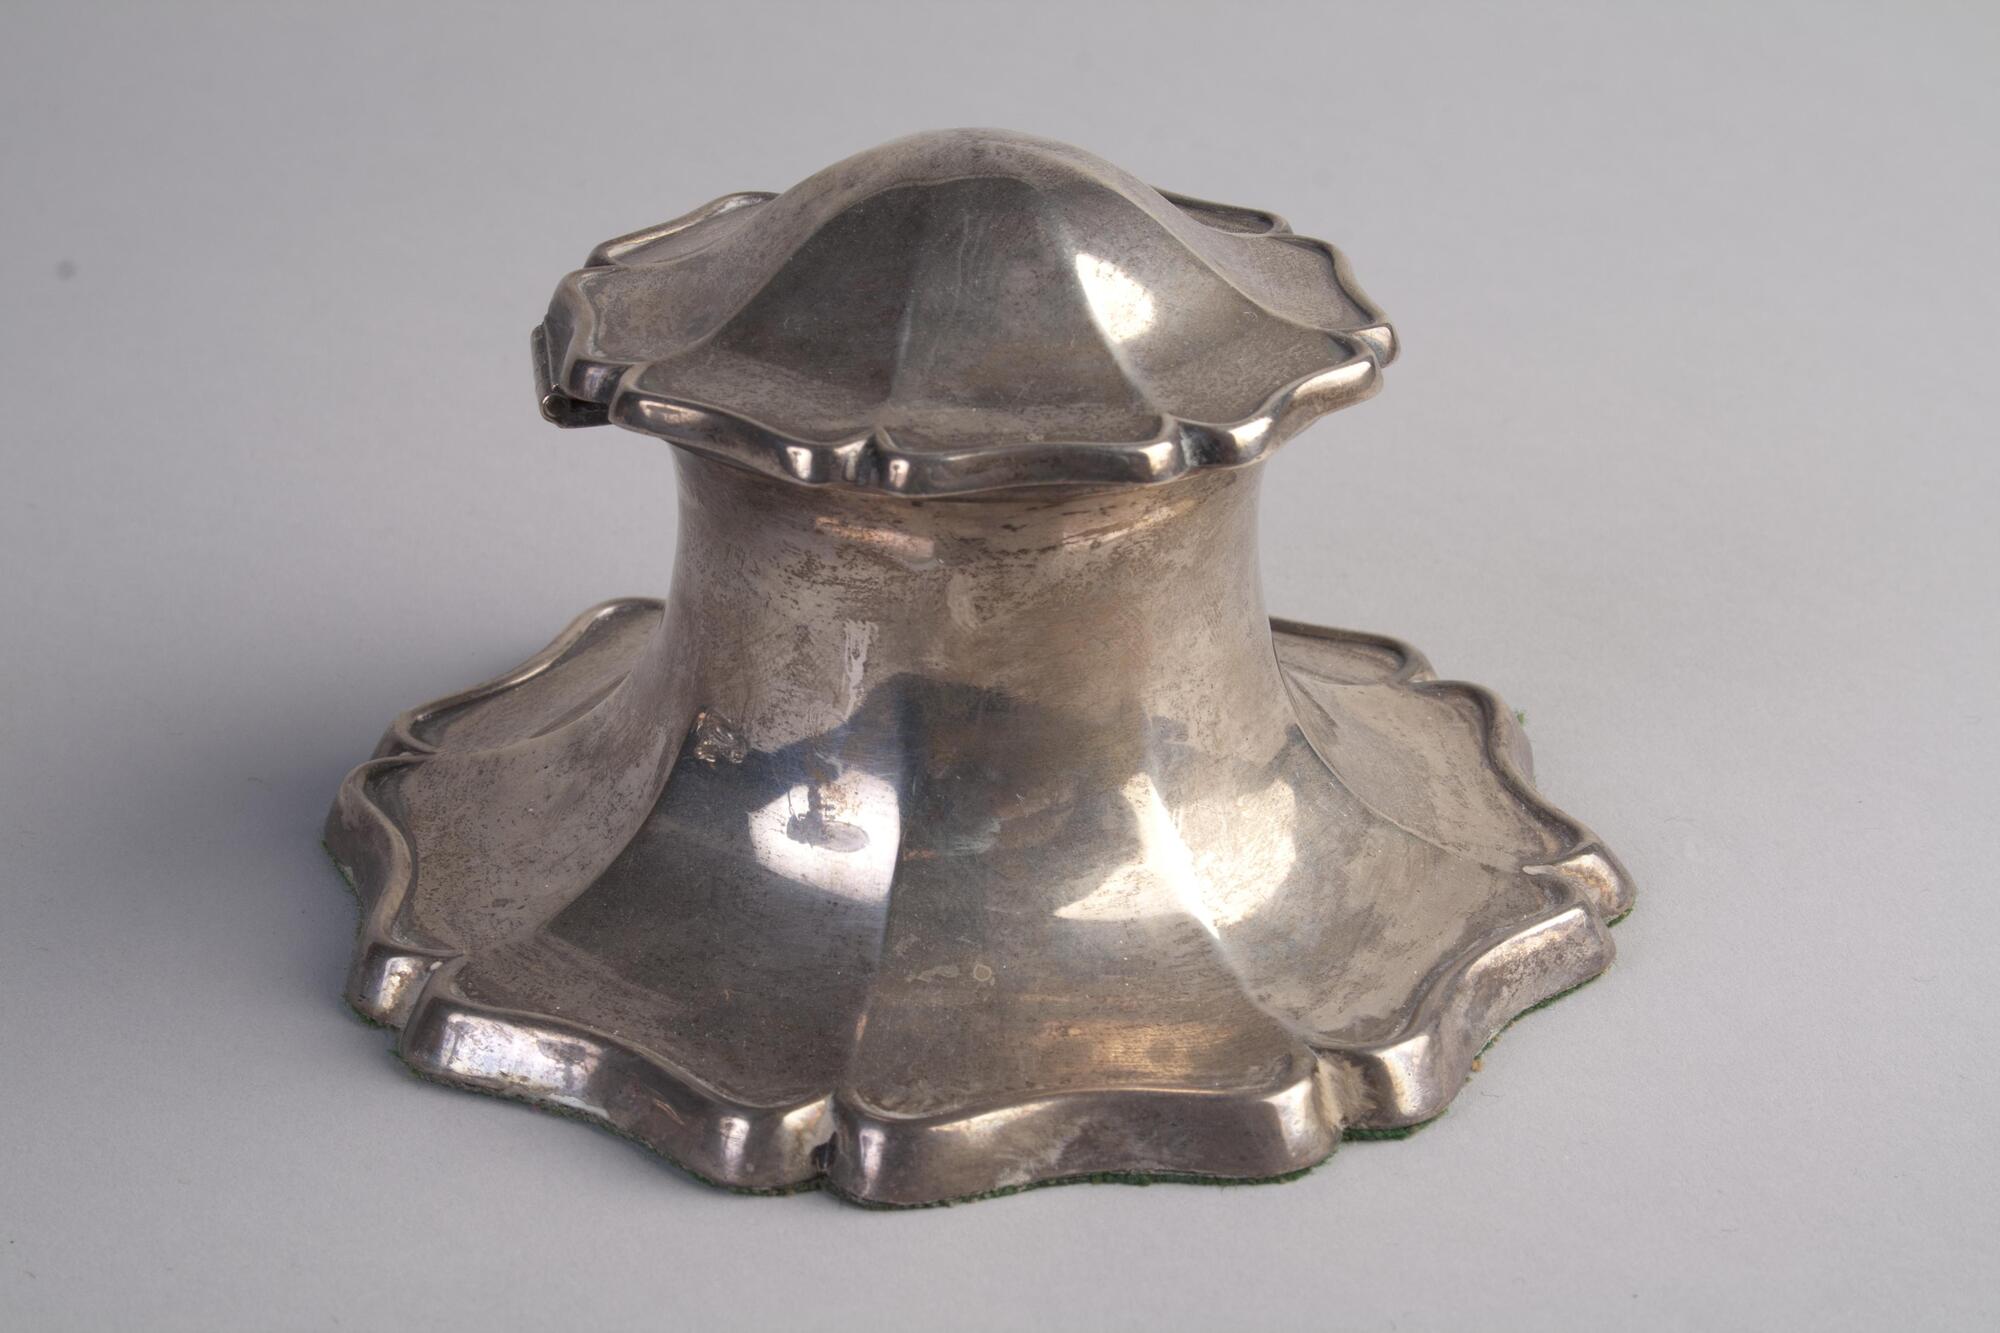 A silver metal inkwell has a shape and body like a foundain. The edges of the bottom and the lid of the inkwell is irregular.